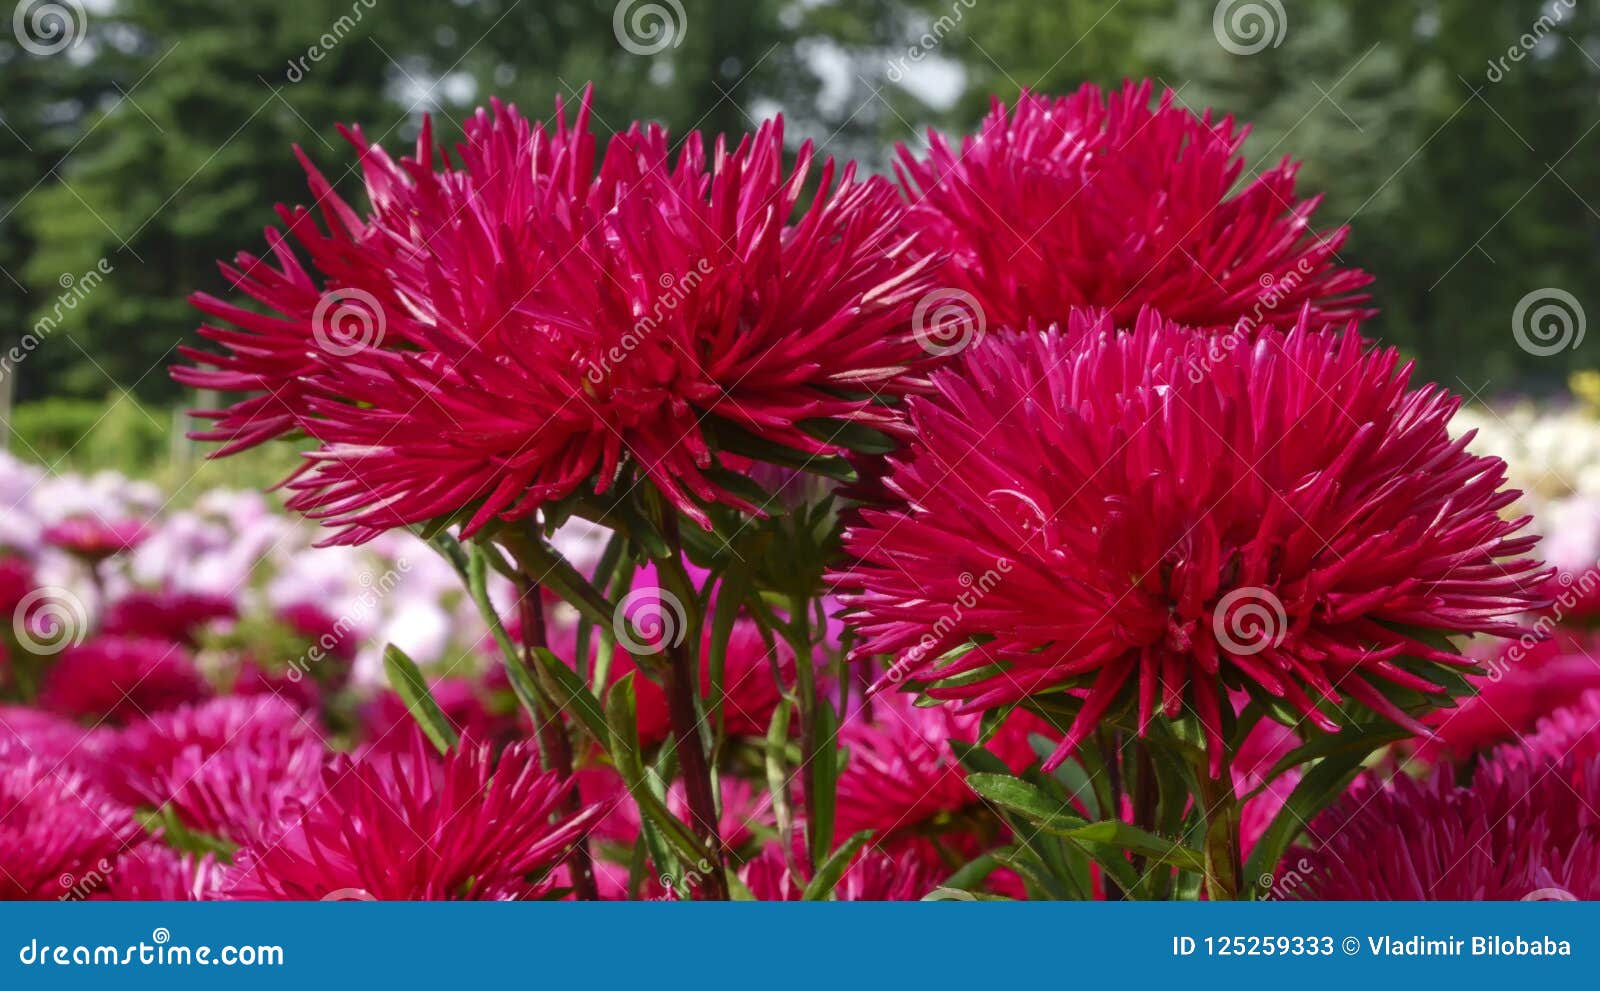 Red Garden Asters Stock Image Image Of Backgrounds 125259333